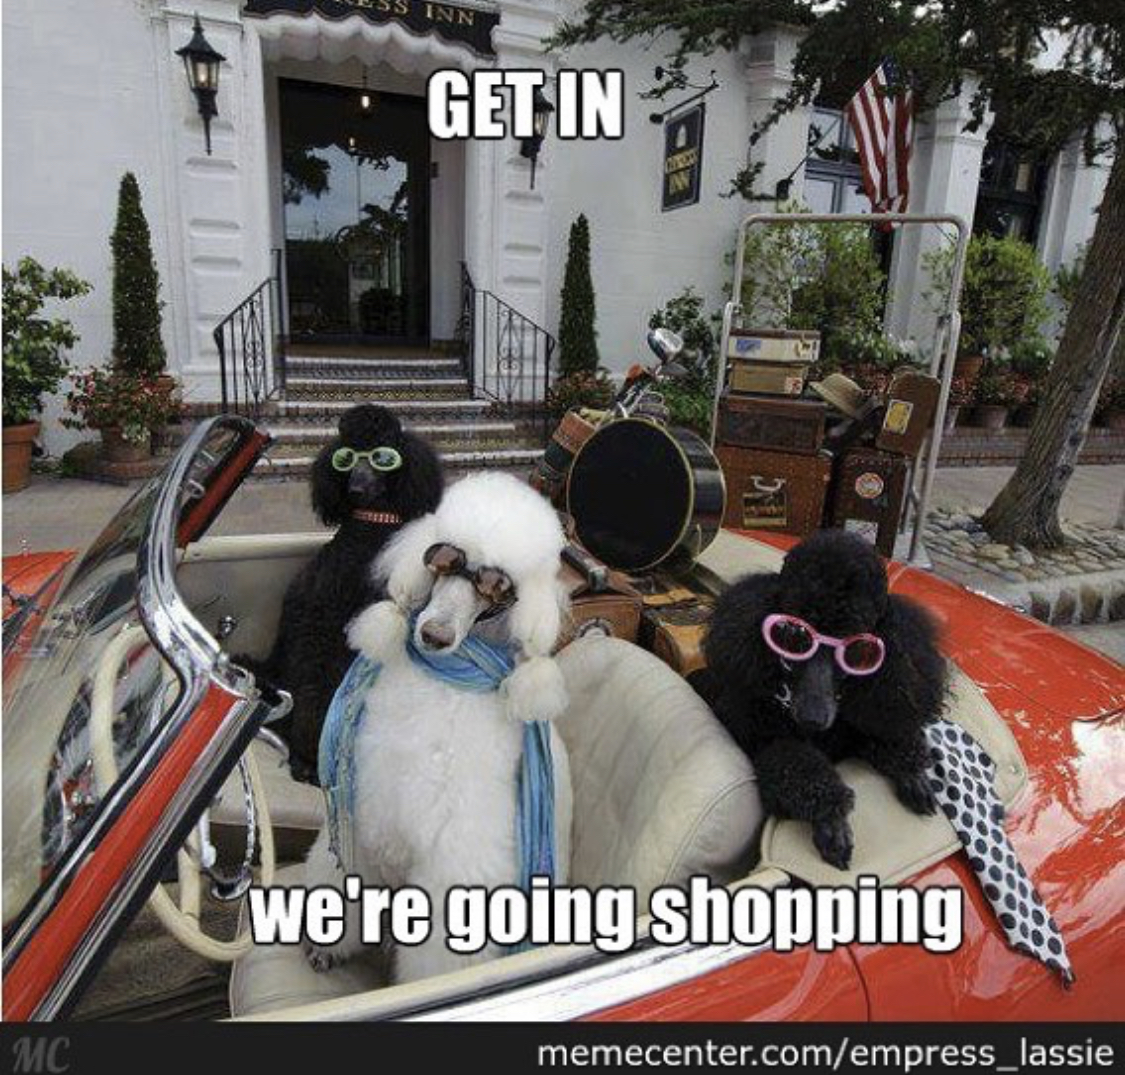 three fashionable Poodle sitting in a red car with no roof photo with a text- Get in, we're going shopping.